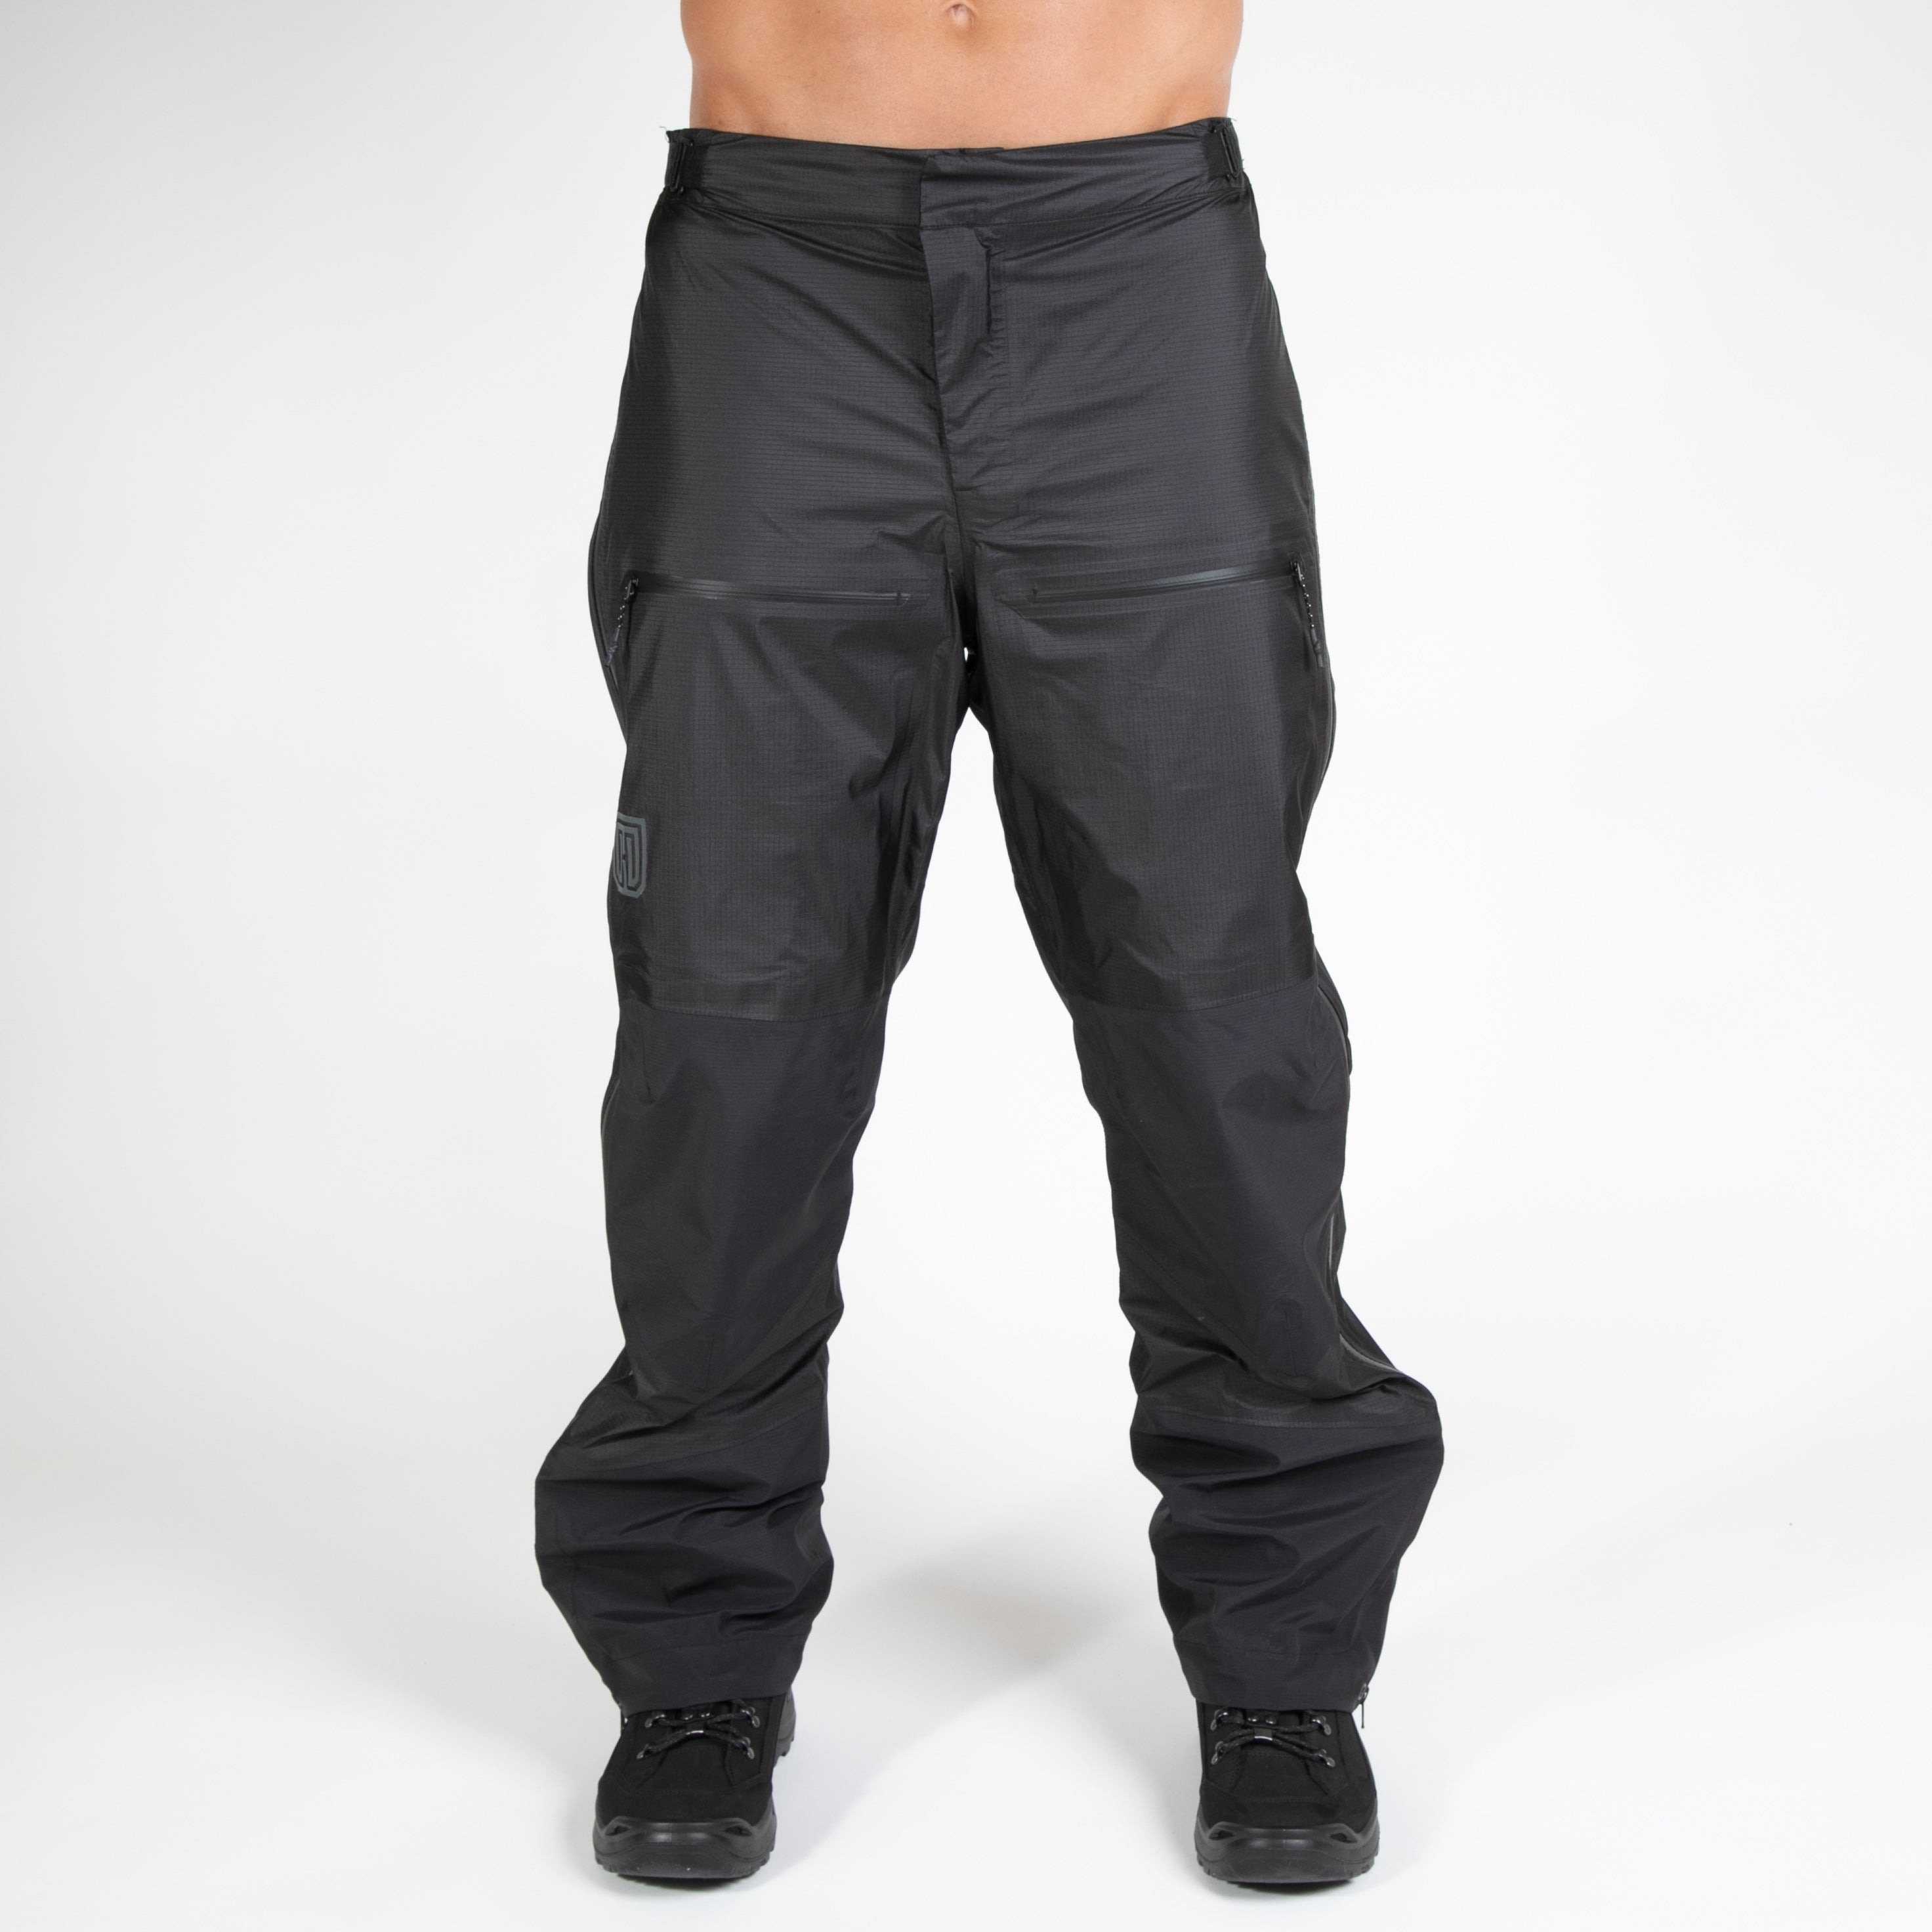 MTHD Mountain eVent™ DVstorm DVexpedition Hardshell 3L Pant L5 Apparel MTHD Black Small 